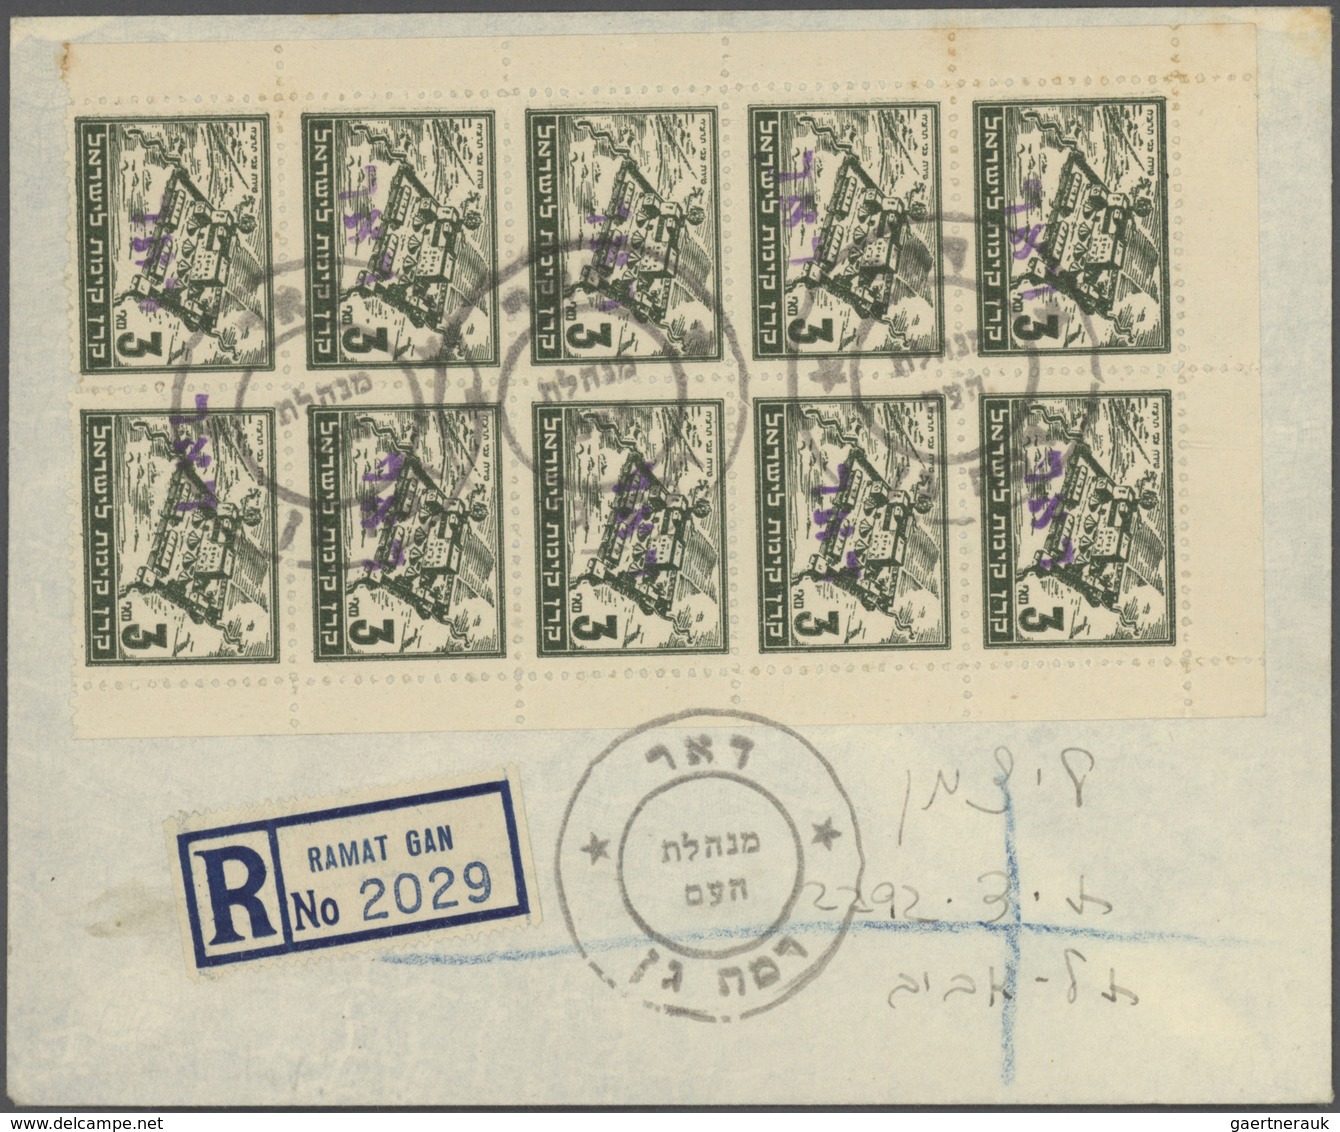 Br Israel: ISRAEL INTERIMS : 1948 over 200 registered , 17 Express and 11 reg.Express covers with a gre